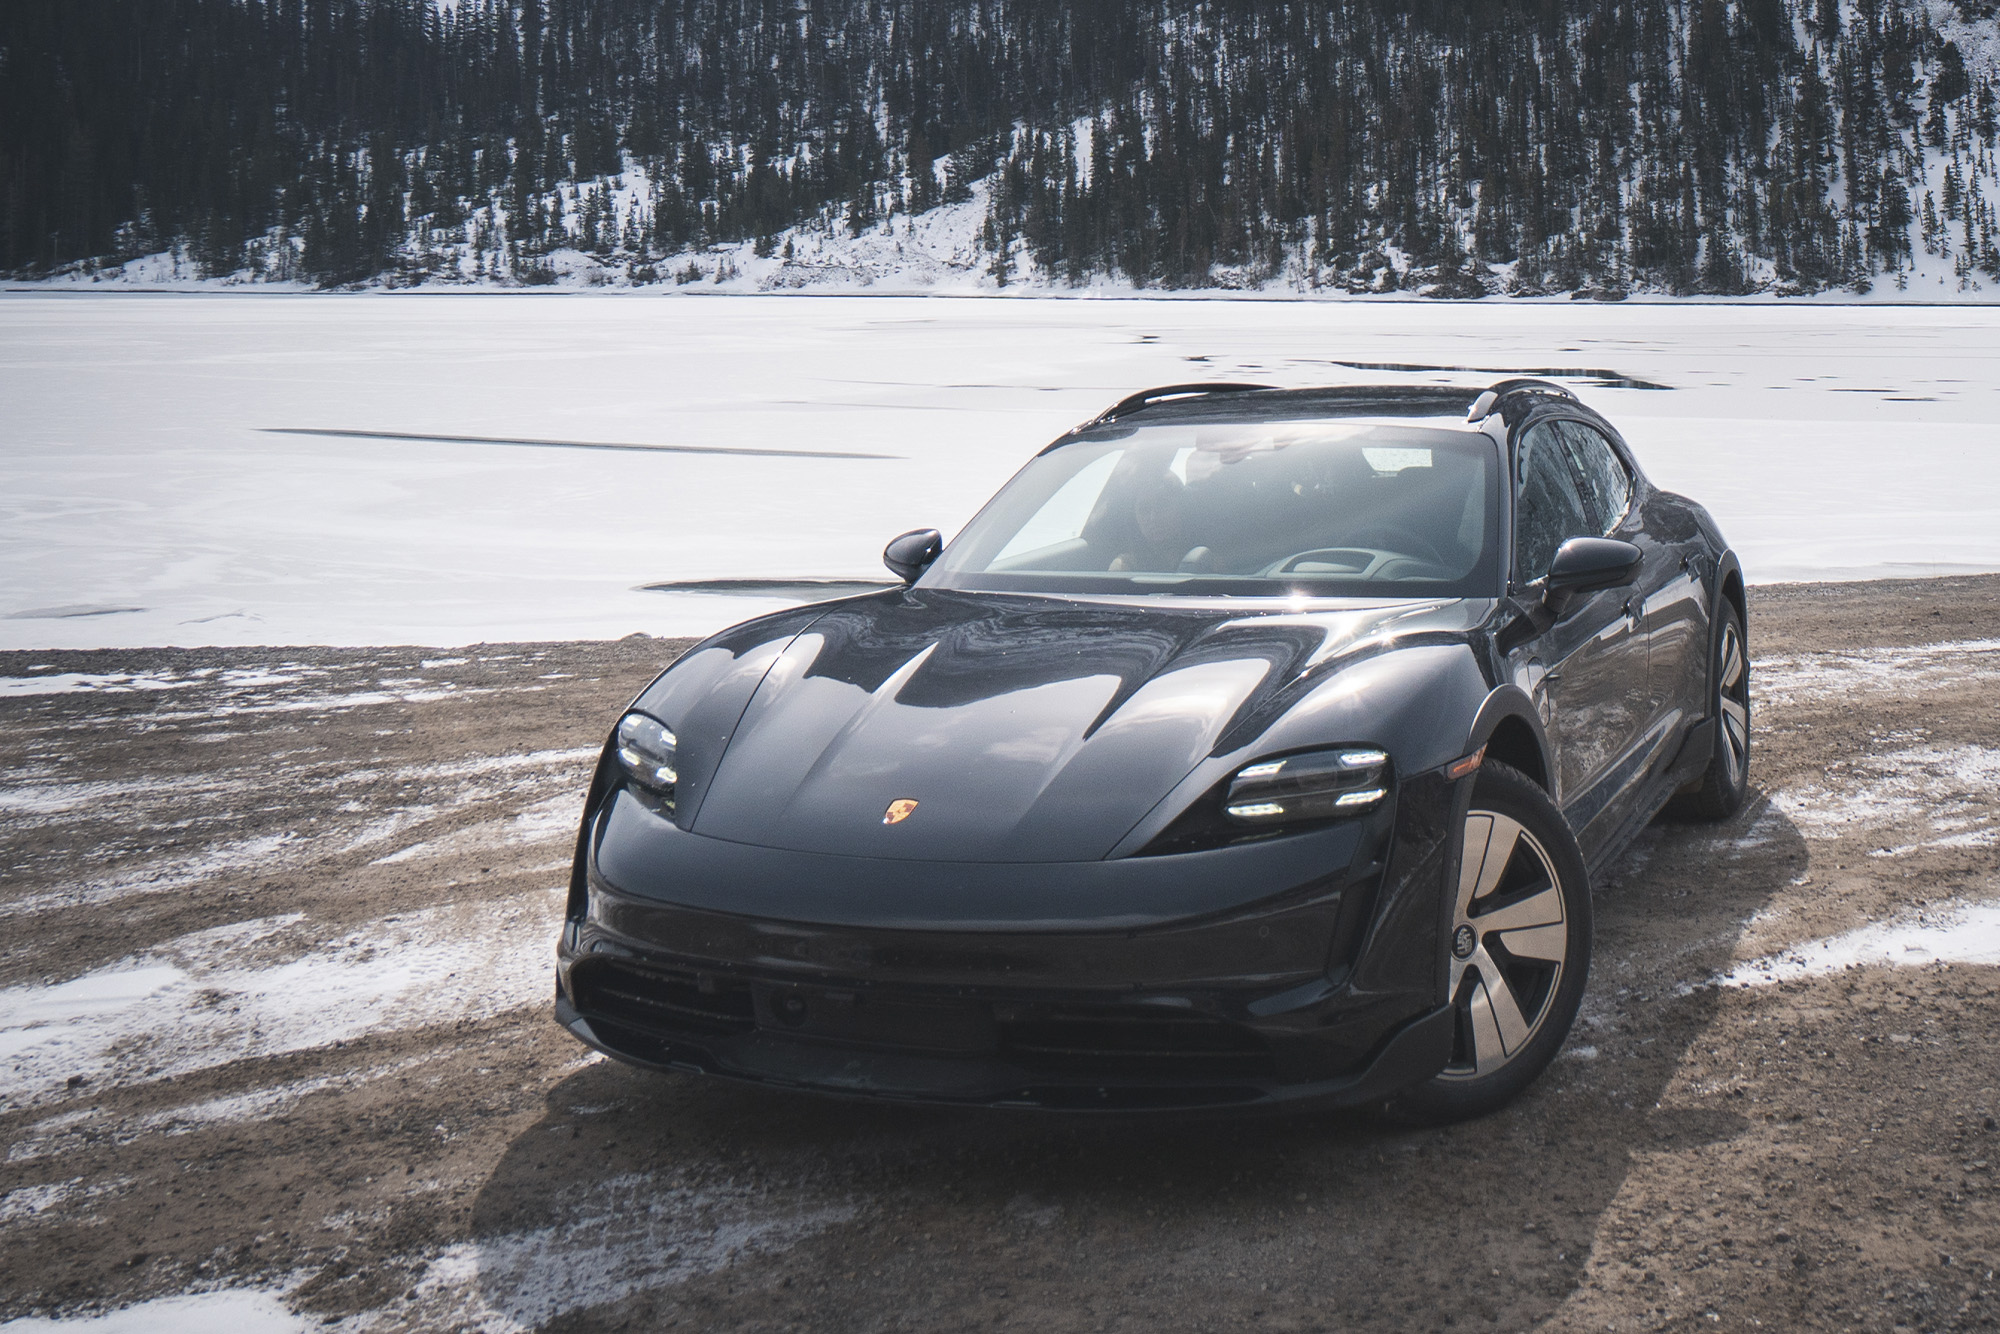 Black Porsche parked at Panorama Mountain Resort & Greywolf Golf Club on dirt road with snow in the background, shot from above the front